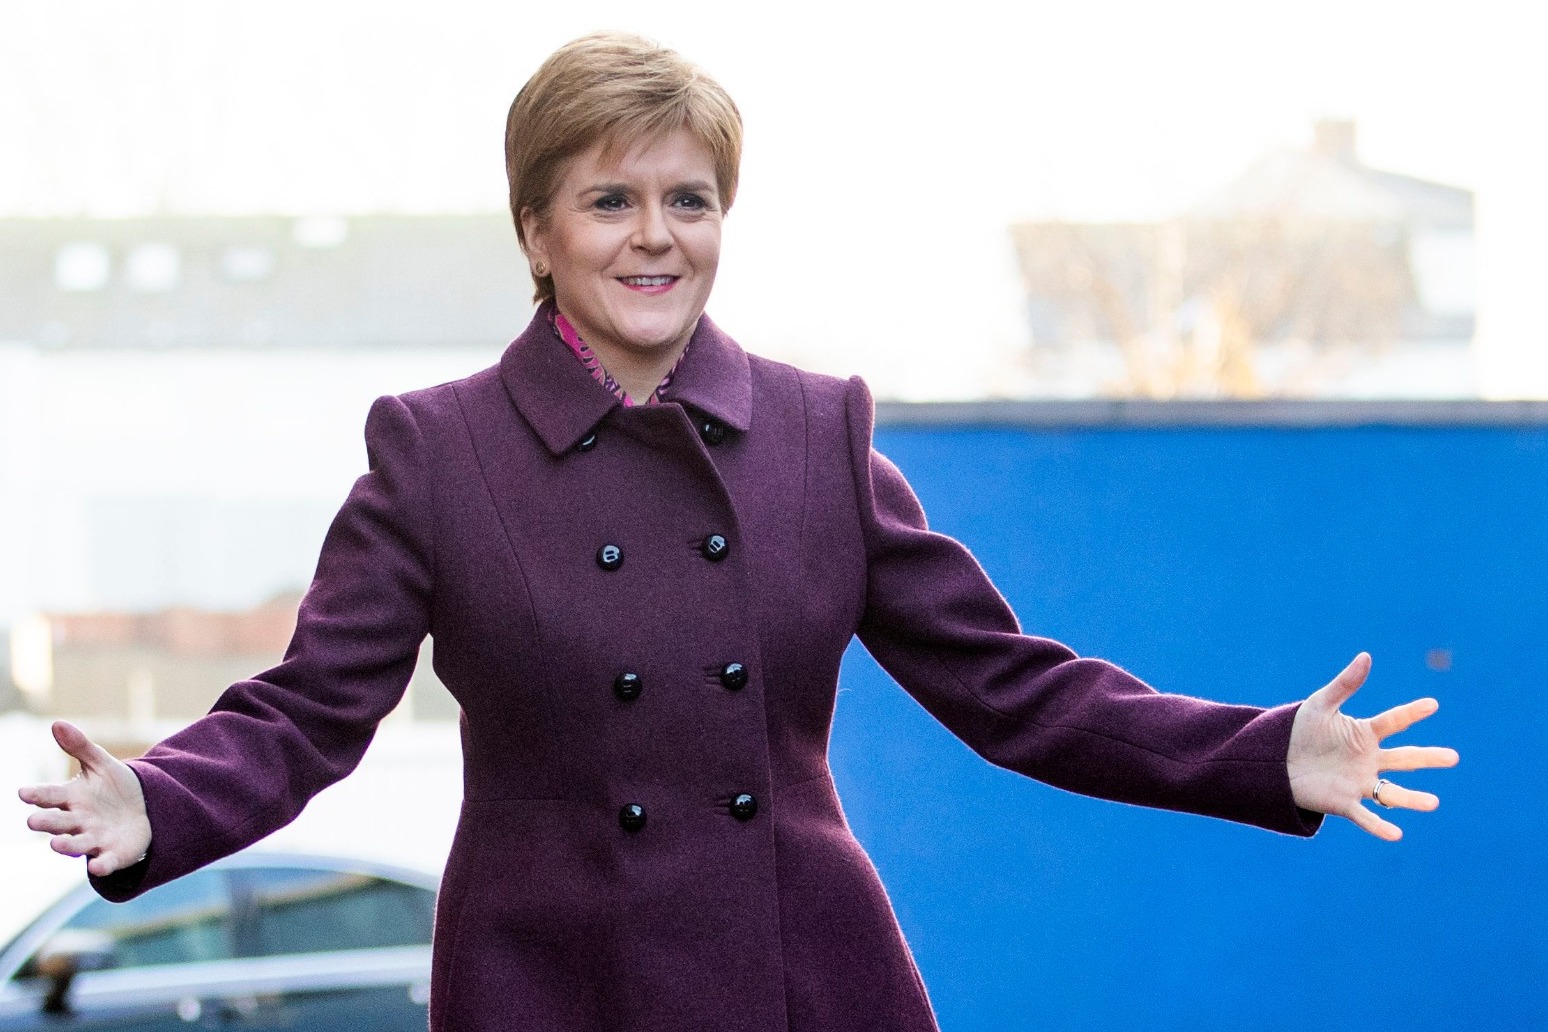 SNP PLANS LEGAL CHALLENGE OVER EXCLUSION FROM ITV DEBATE 